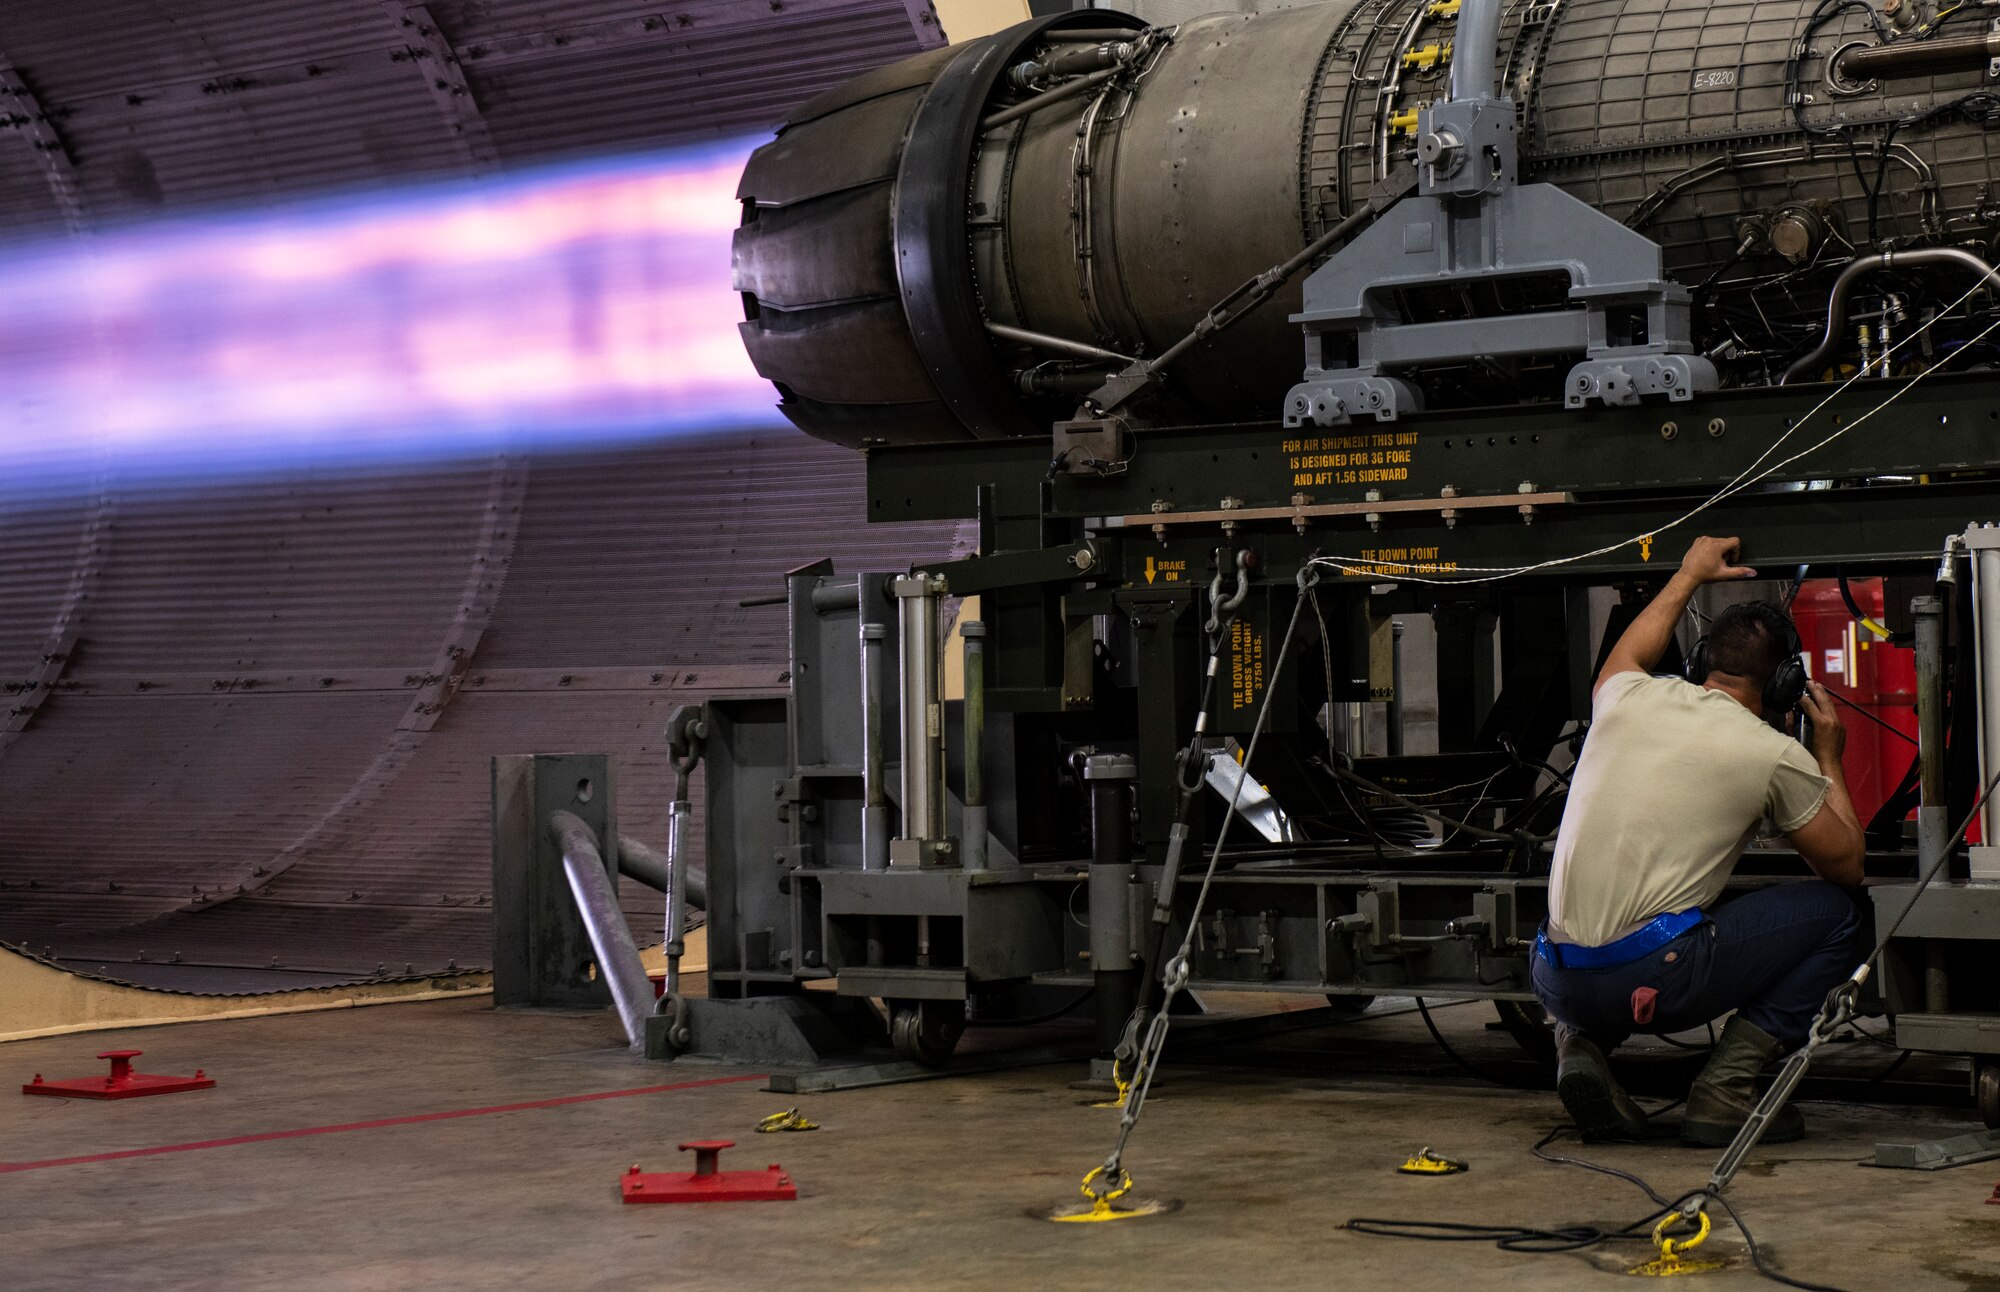 U.S. Air Force Senior Airman Skyler Fleming, 20th Component Maintenance Squadron engine test facility (ETF) journeyman, inspects an active General Electric F110-GE-129 engine at Shaw Air Force Base, S.C., May 29, 2019.